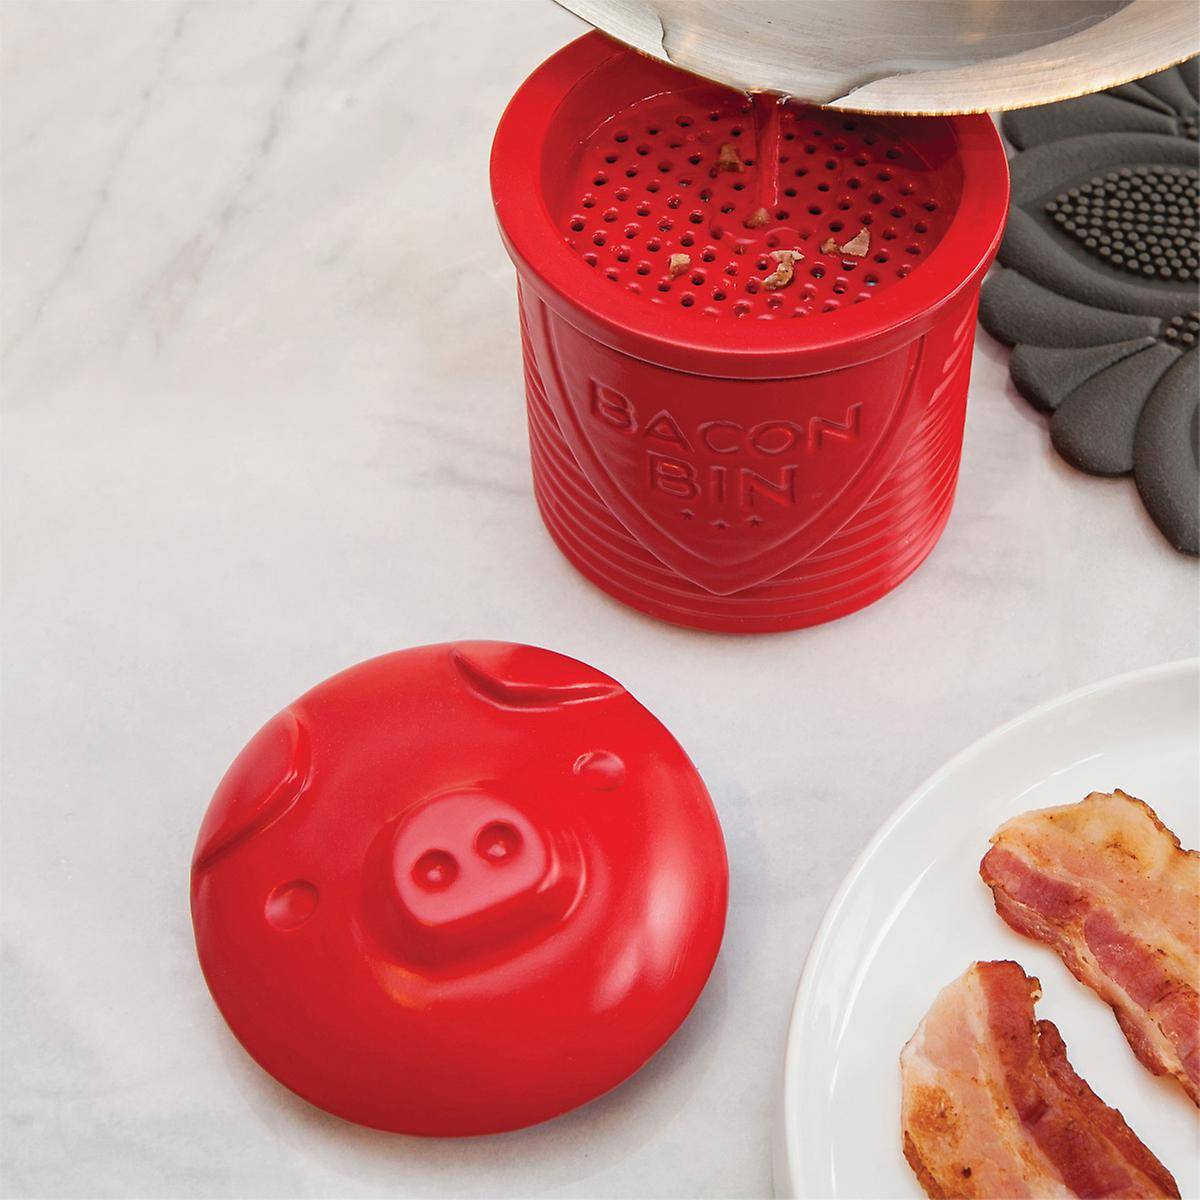   a Bacon Bin is a great stocking stuffer for foodies